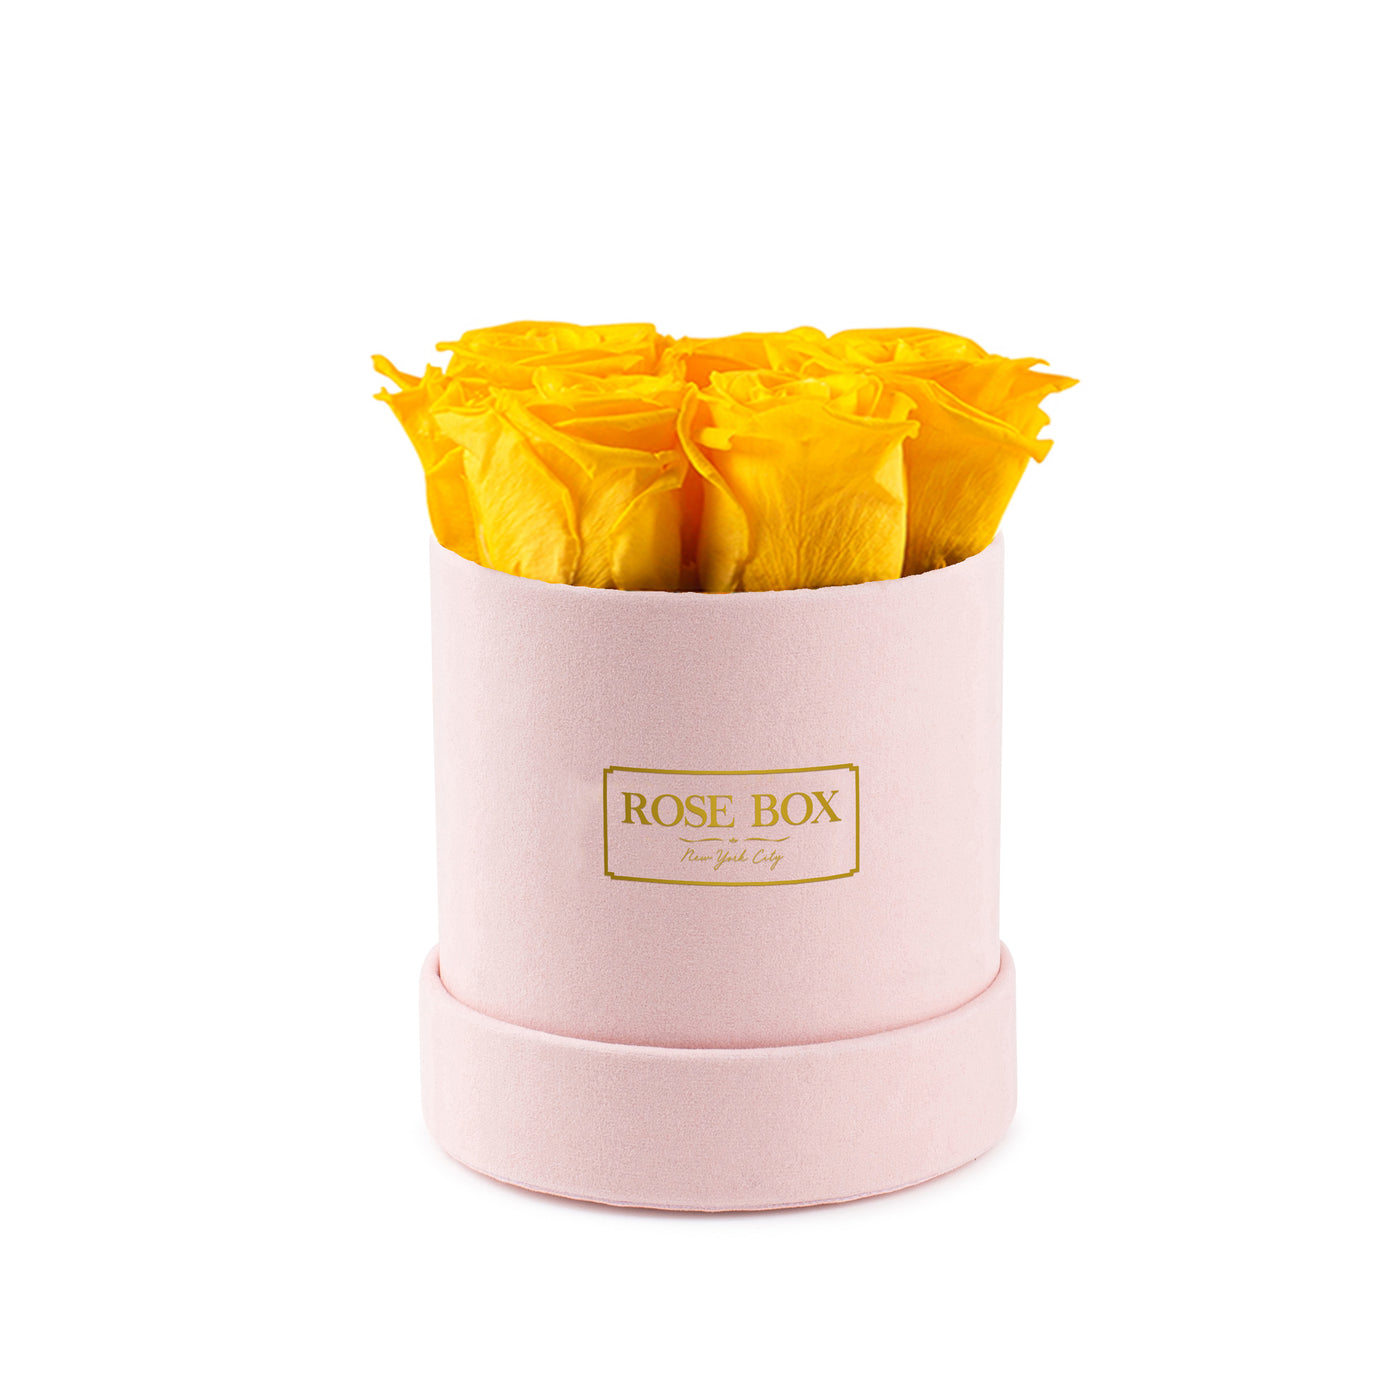 Mini Pink Box with Bright Yellow Roses